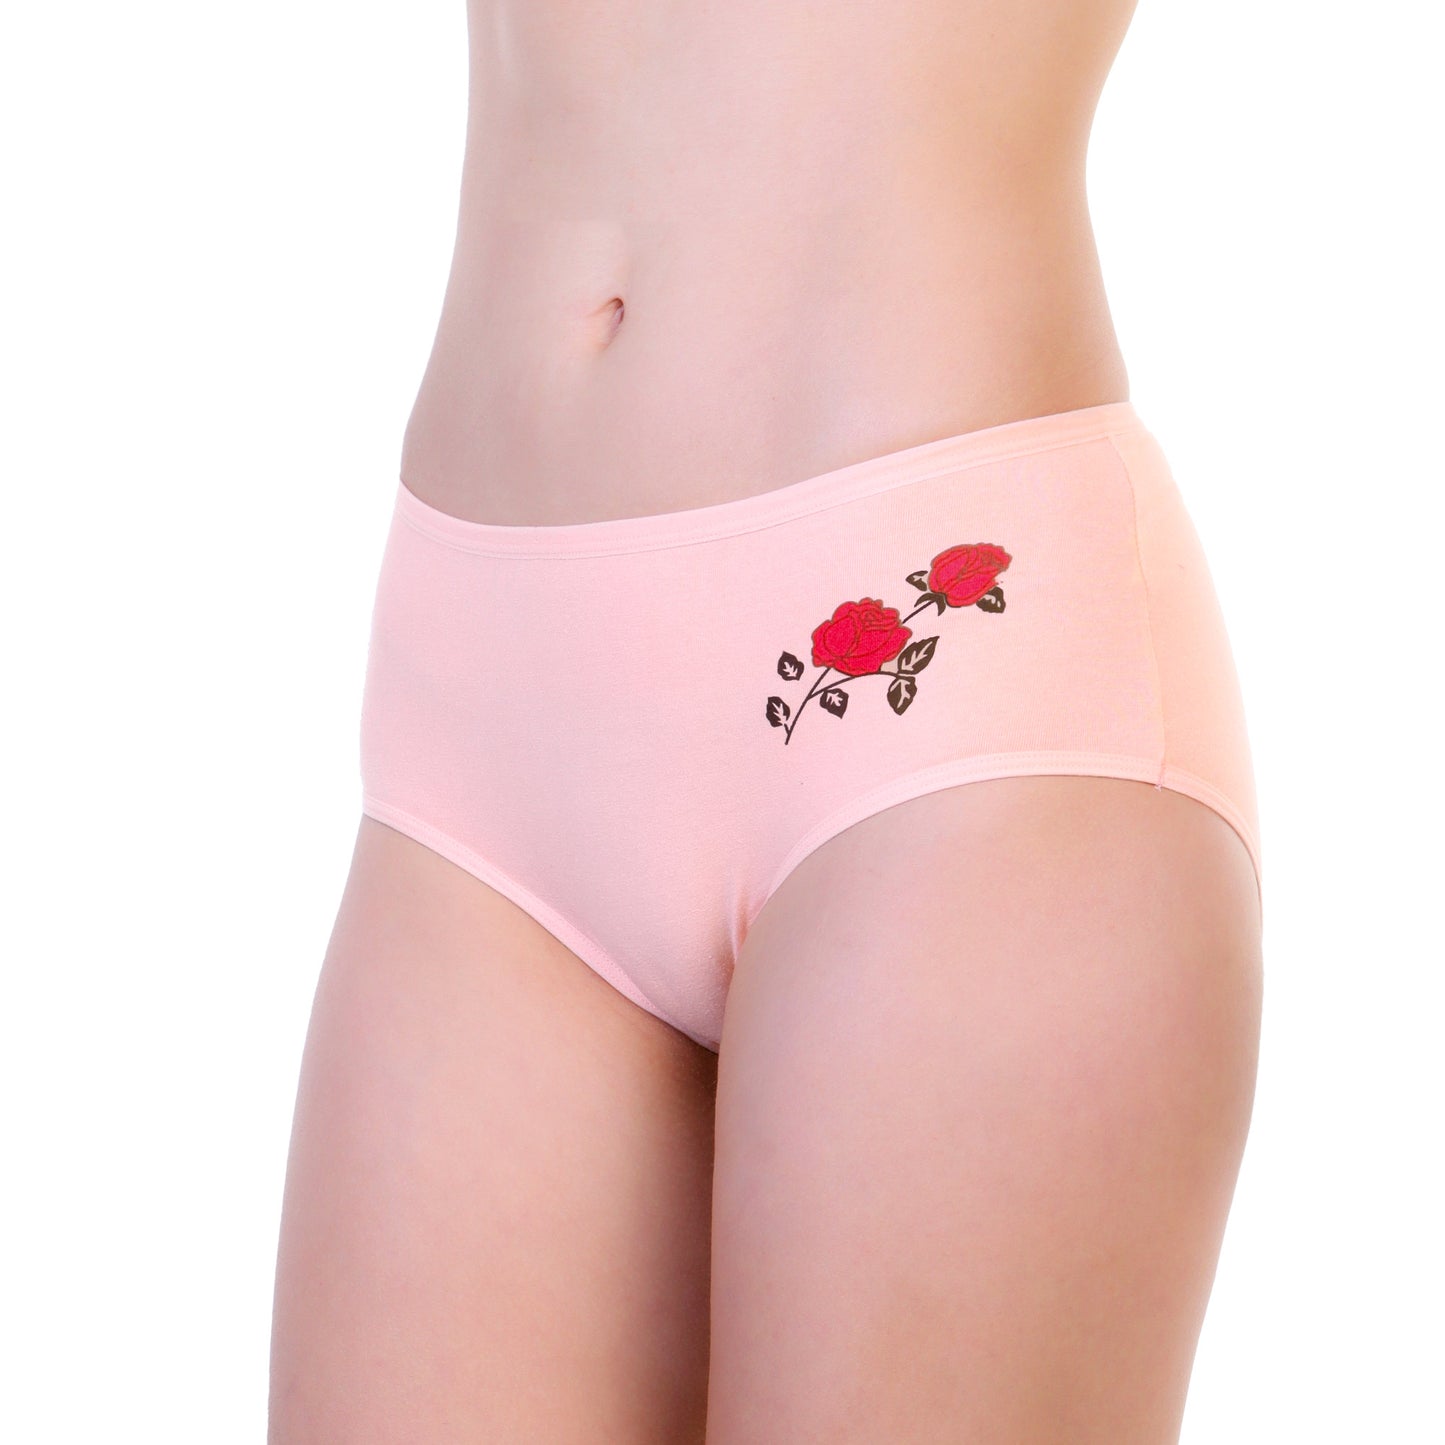 Cotton Mid-Rise Briefs Panties with Roses Pattern Design (6-Pack)